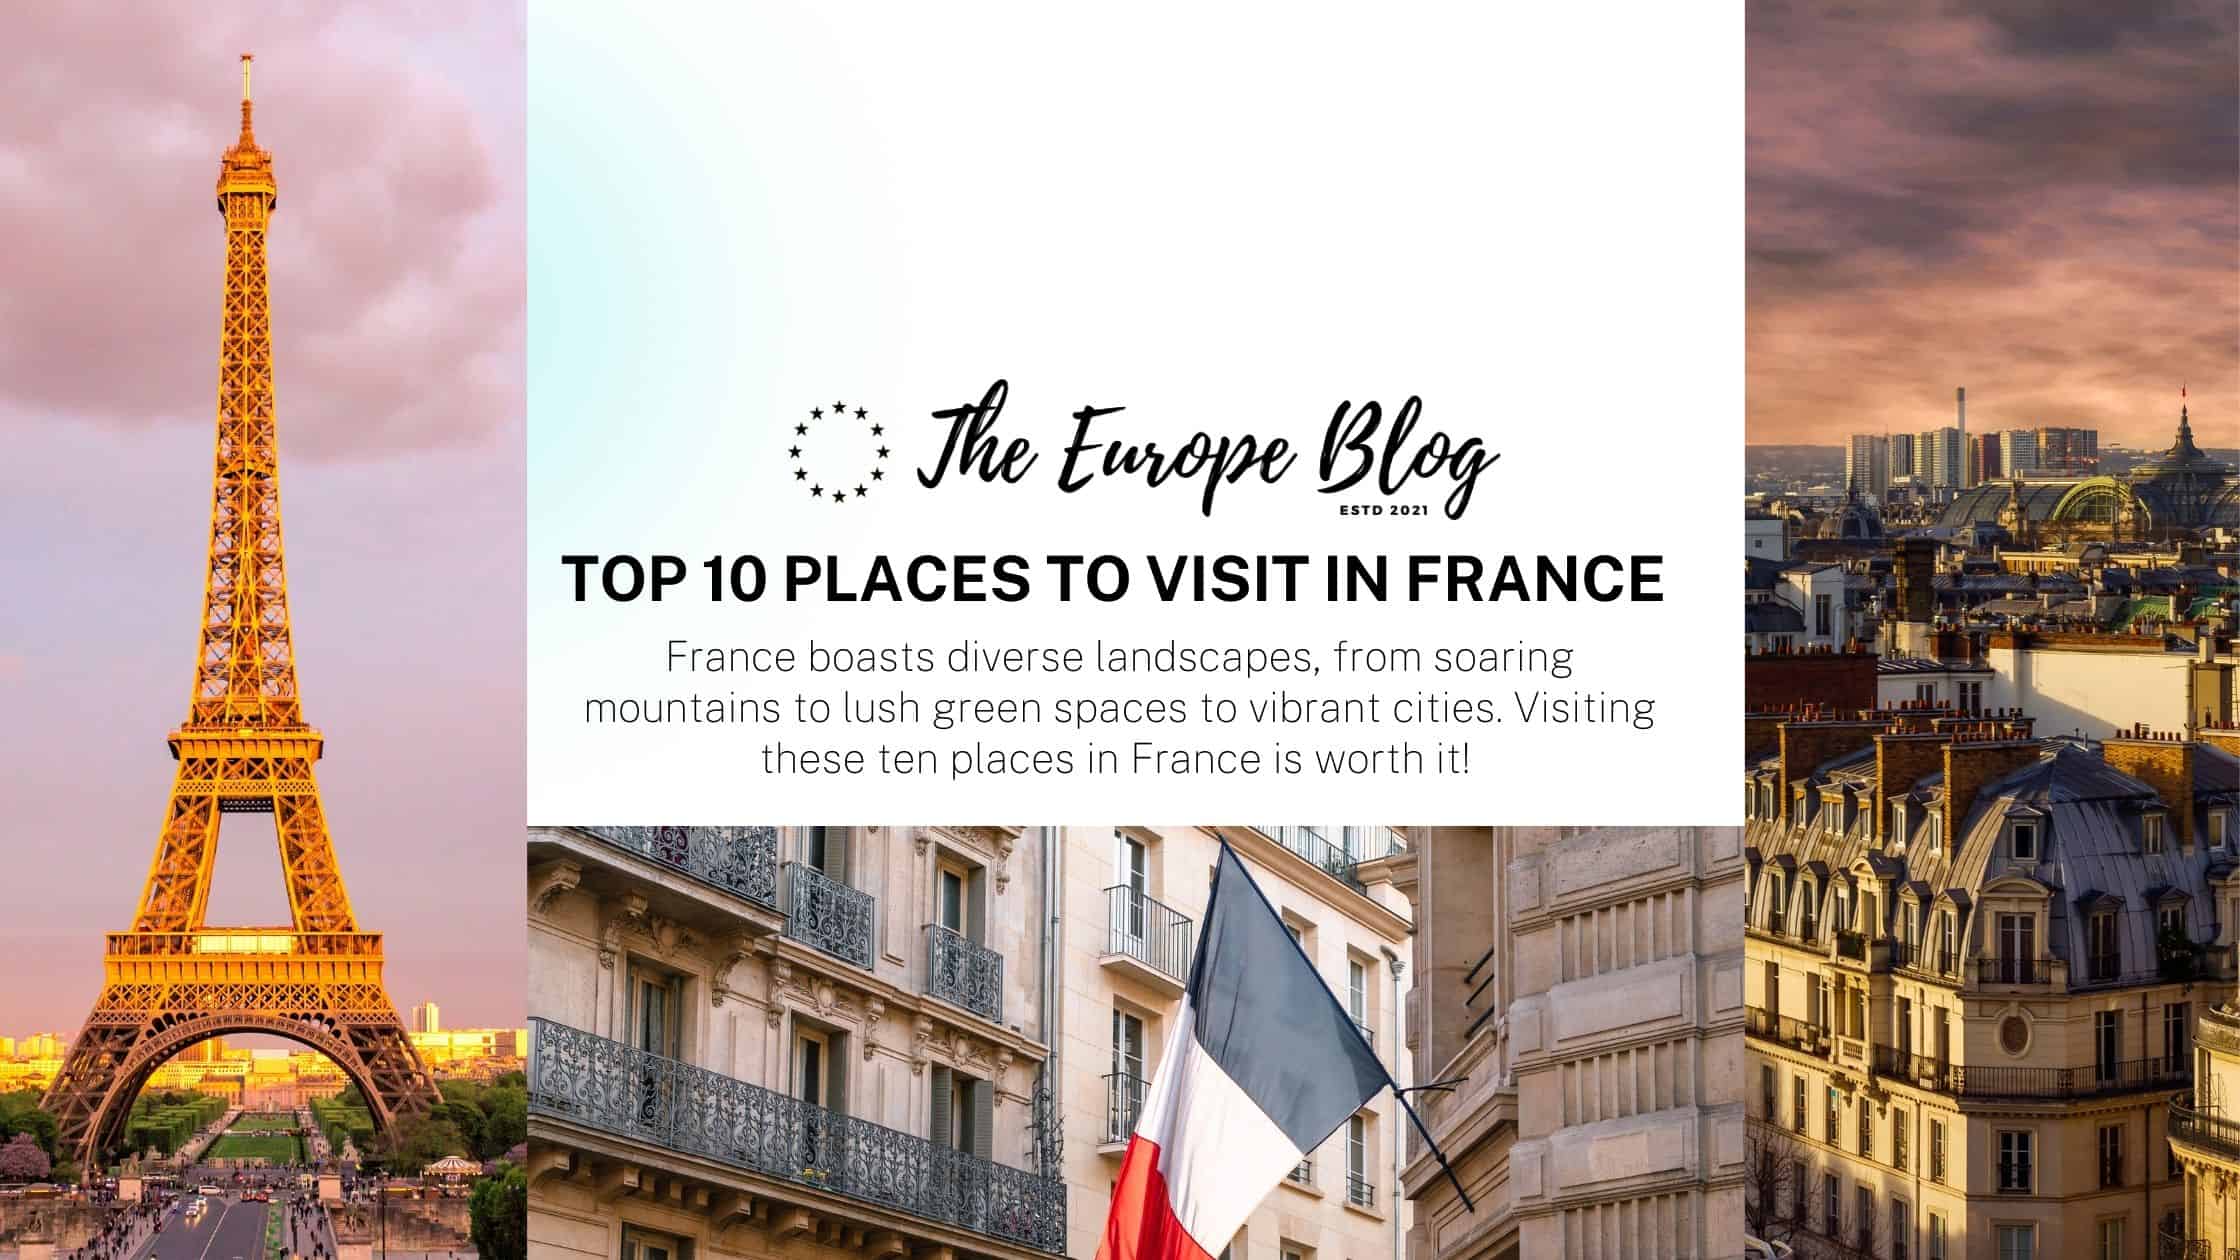 Top 10 Places to Visit in France